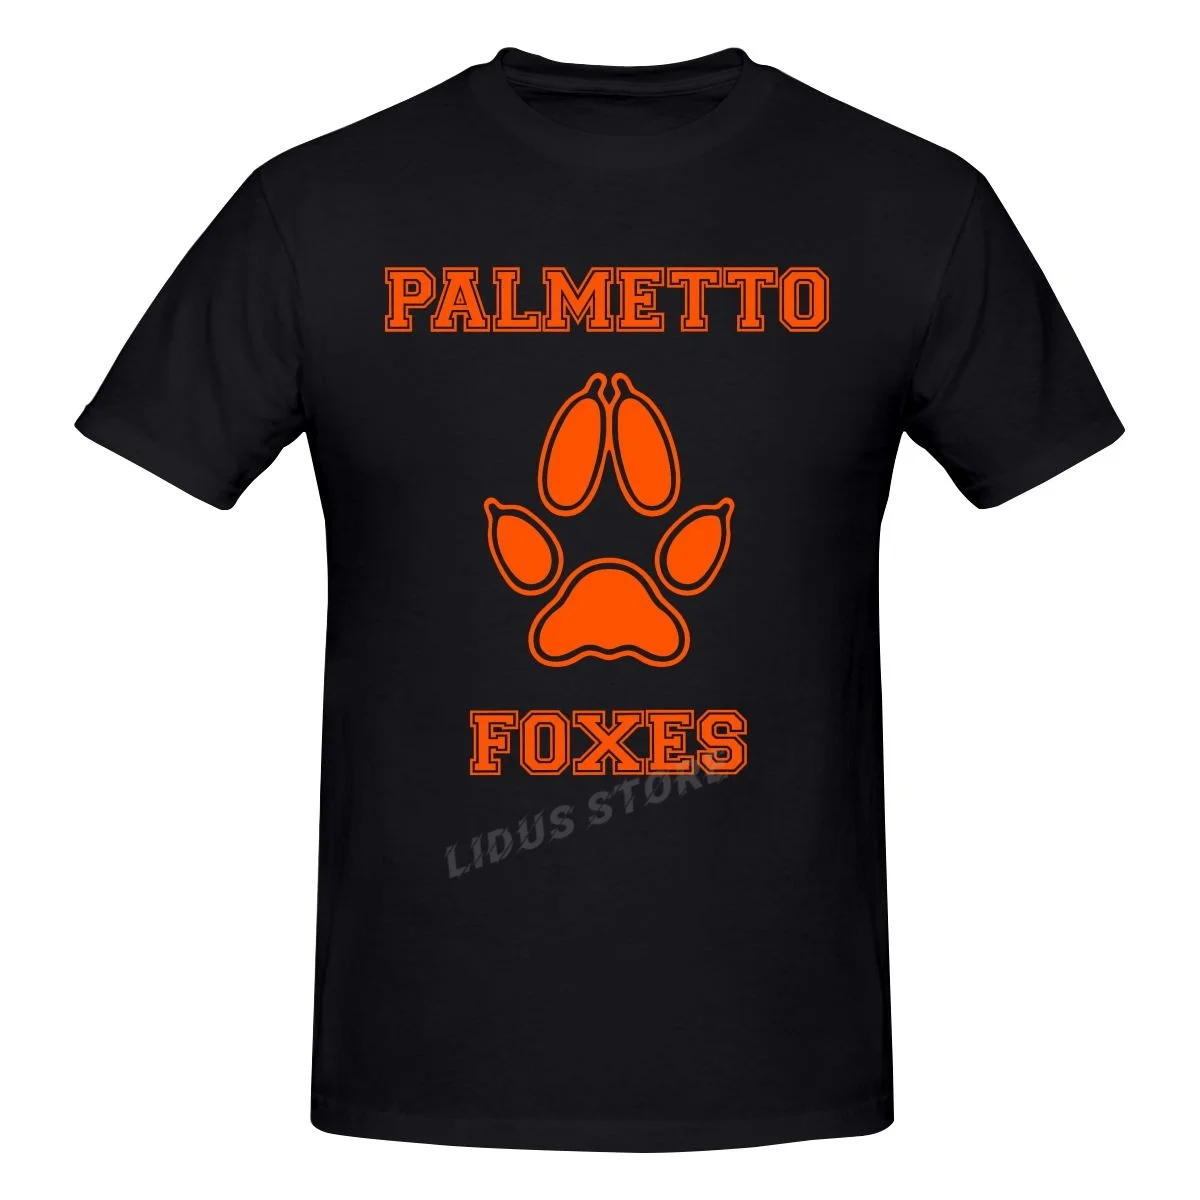 

Palmetto Foxes Tfc Aftg The Foxhole Court All For The Game Nora Sakavic Psu Foxes Foxes Andrew T shirt Harajuku Graphics Tshirt